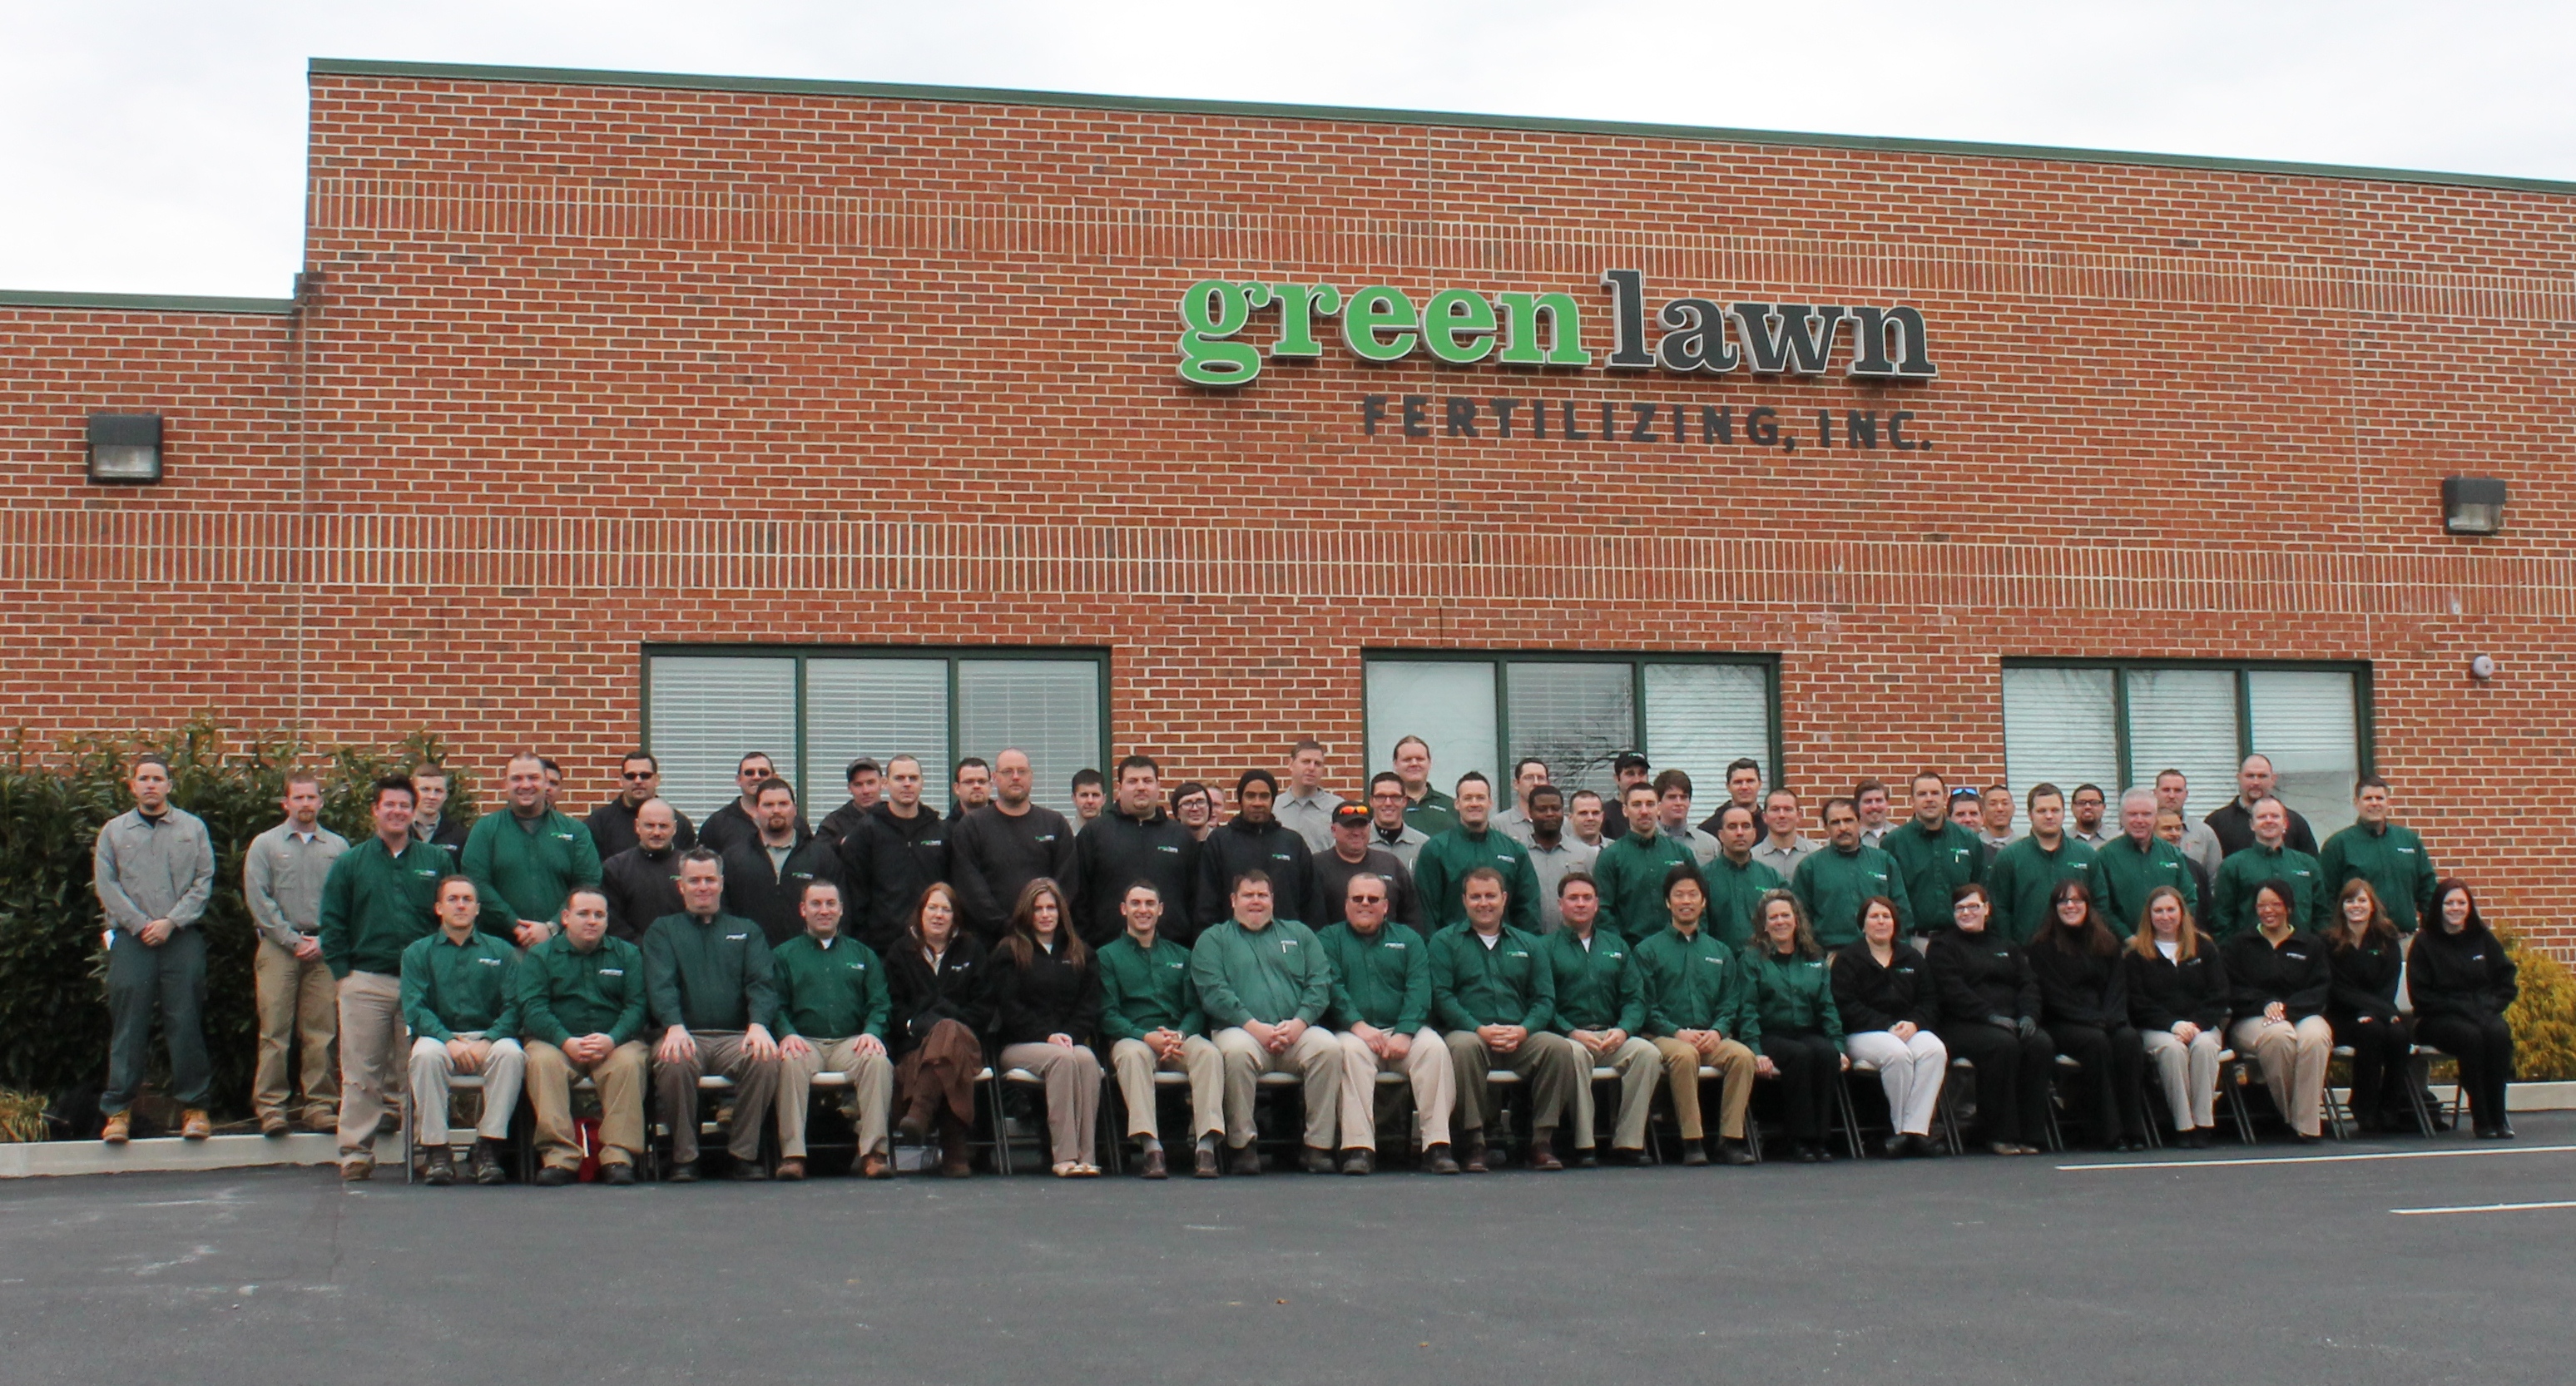 Green Lawn Fertilizing Reaches Their Second Appearance on Inc. Magazine